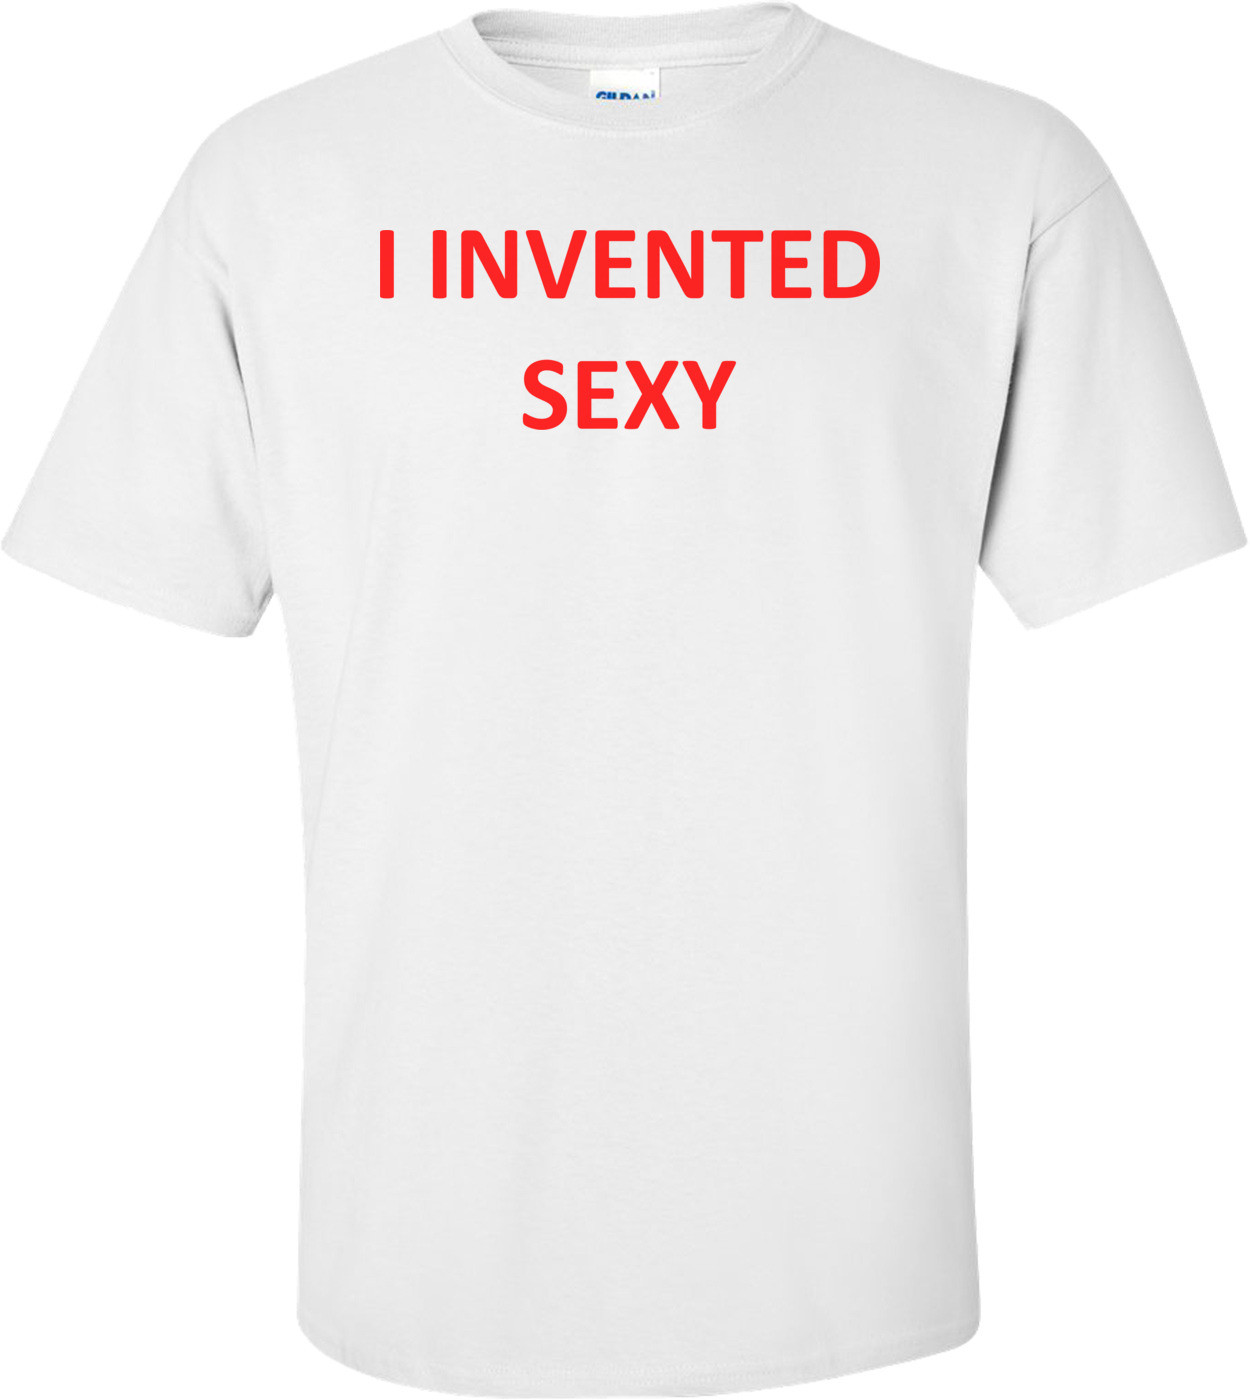 I INVENTED SEXY Shirt